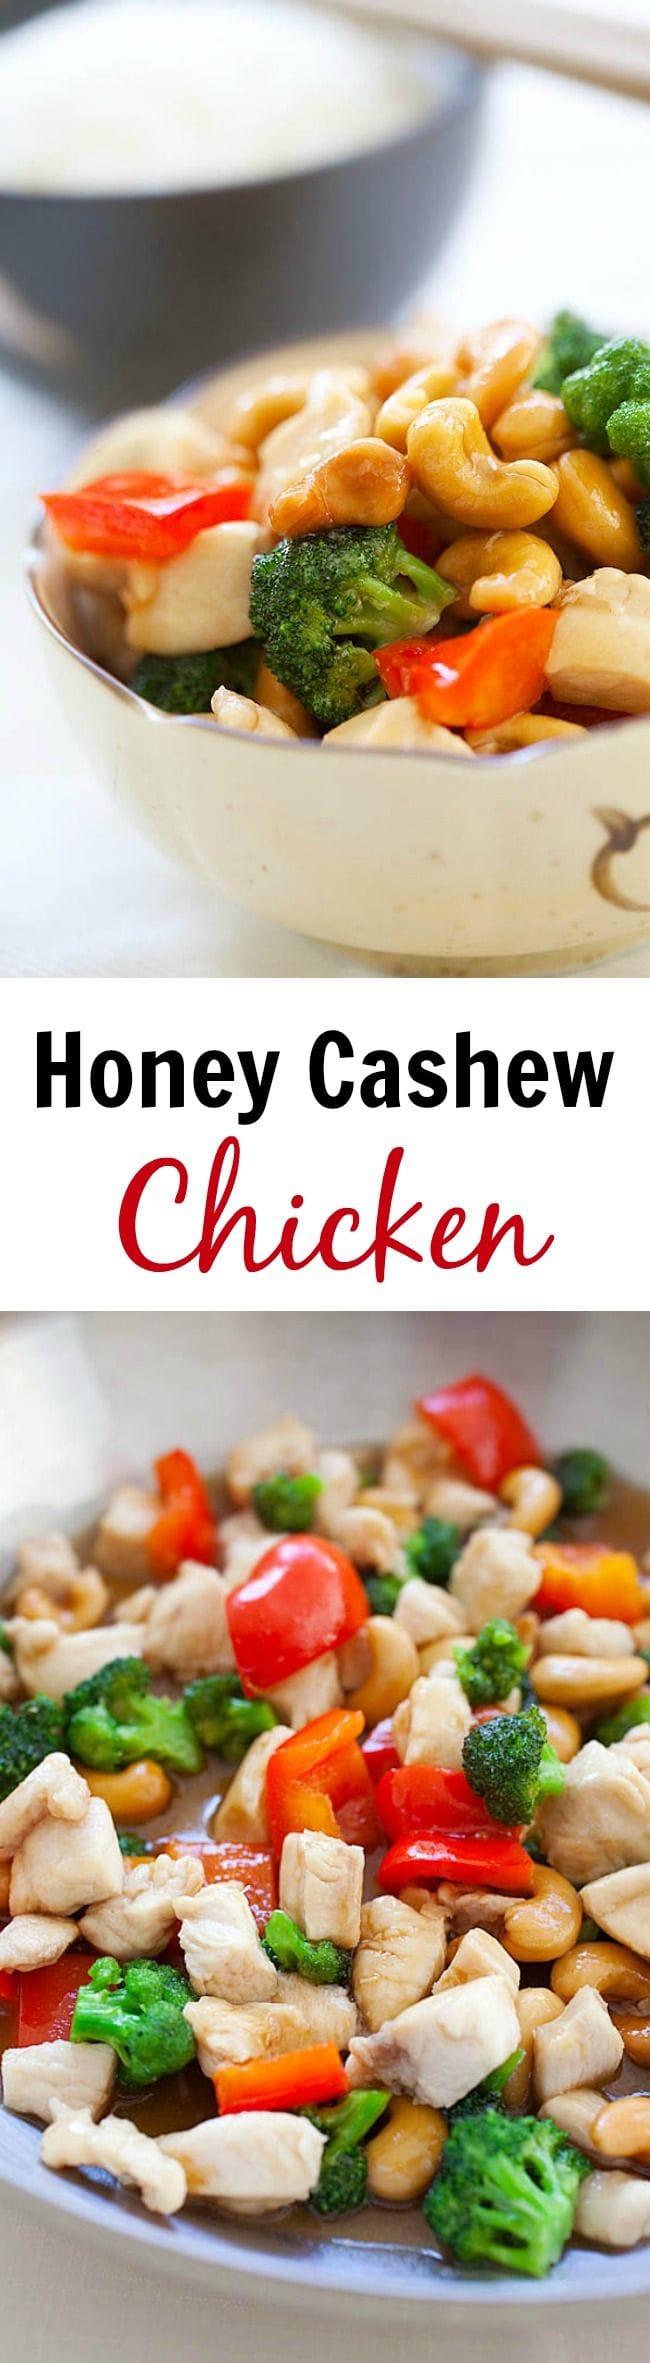 Honey cashew chicken made with chicken and cashew nuts in a savory honey sauce. Easy honey cashew chicken recipe that takes 15 minutes to make | rasamalaysia.com